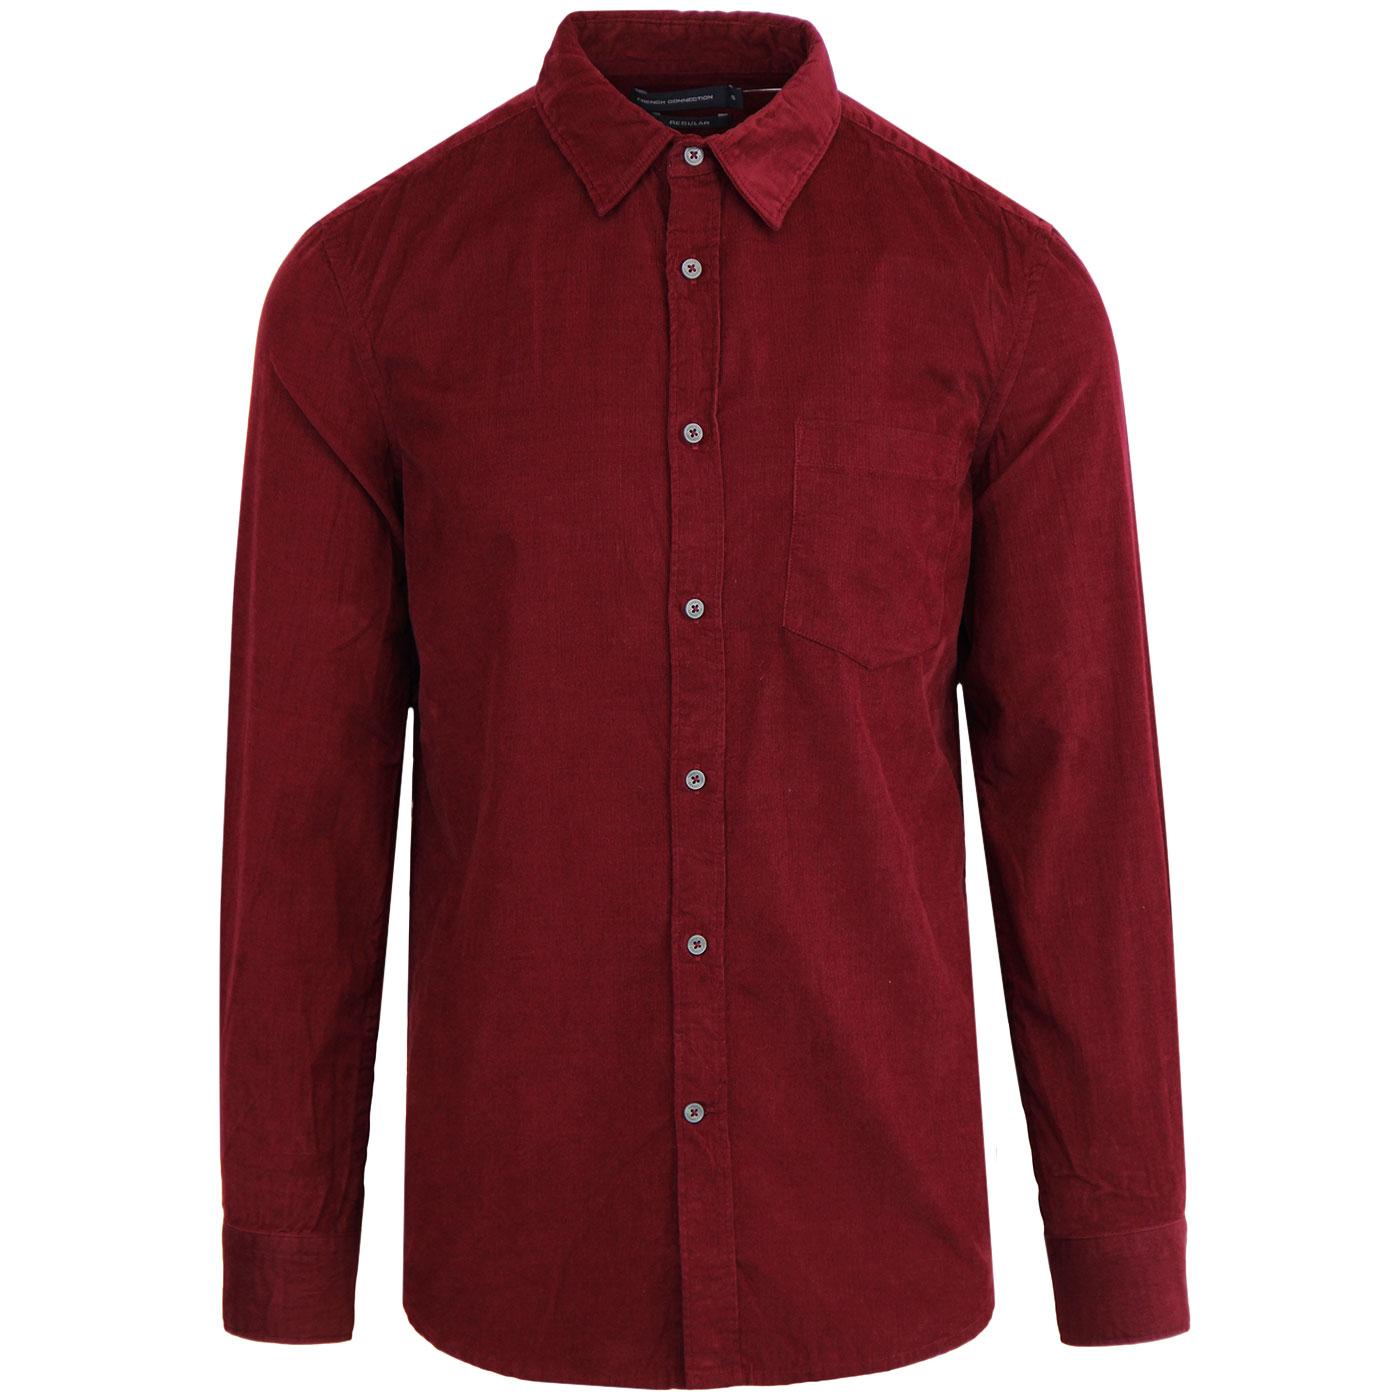 FRENCH CONNECTION Men's Retro Mod Cord Shirt (RR)